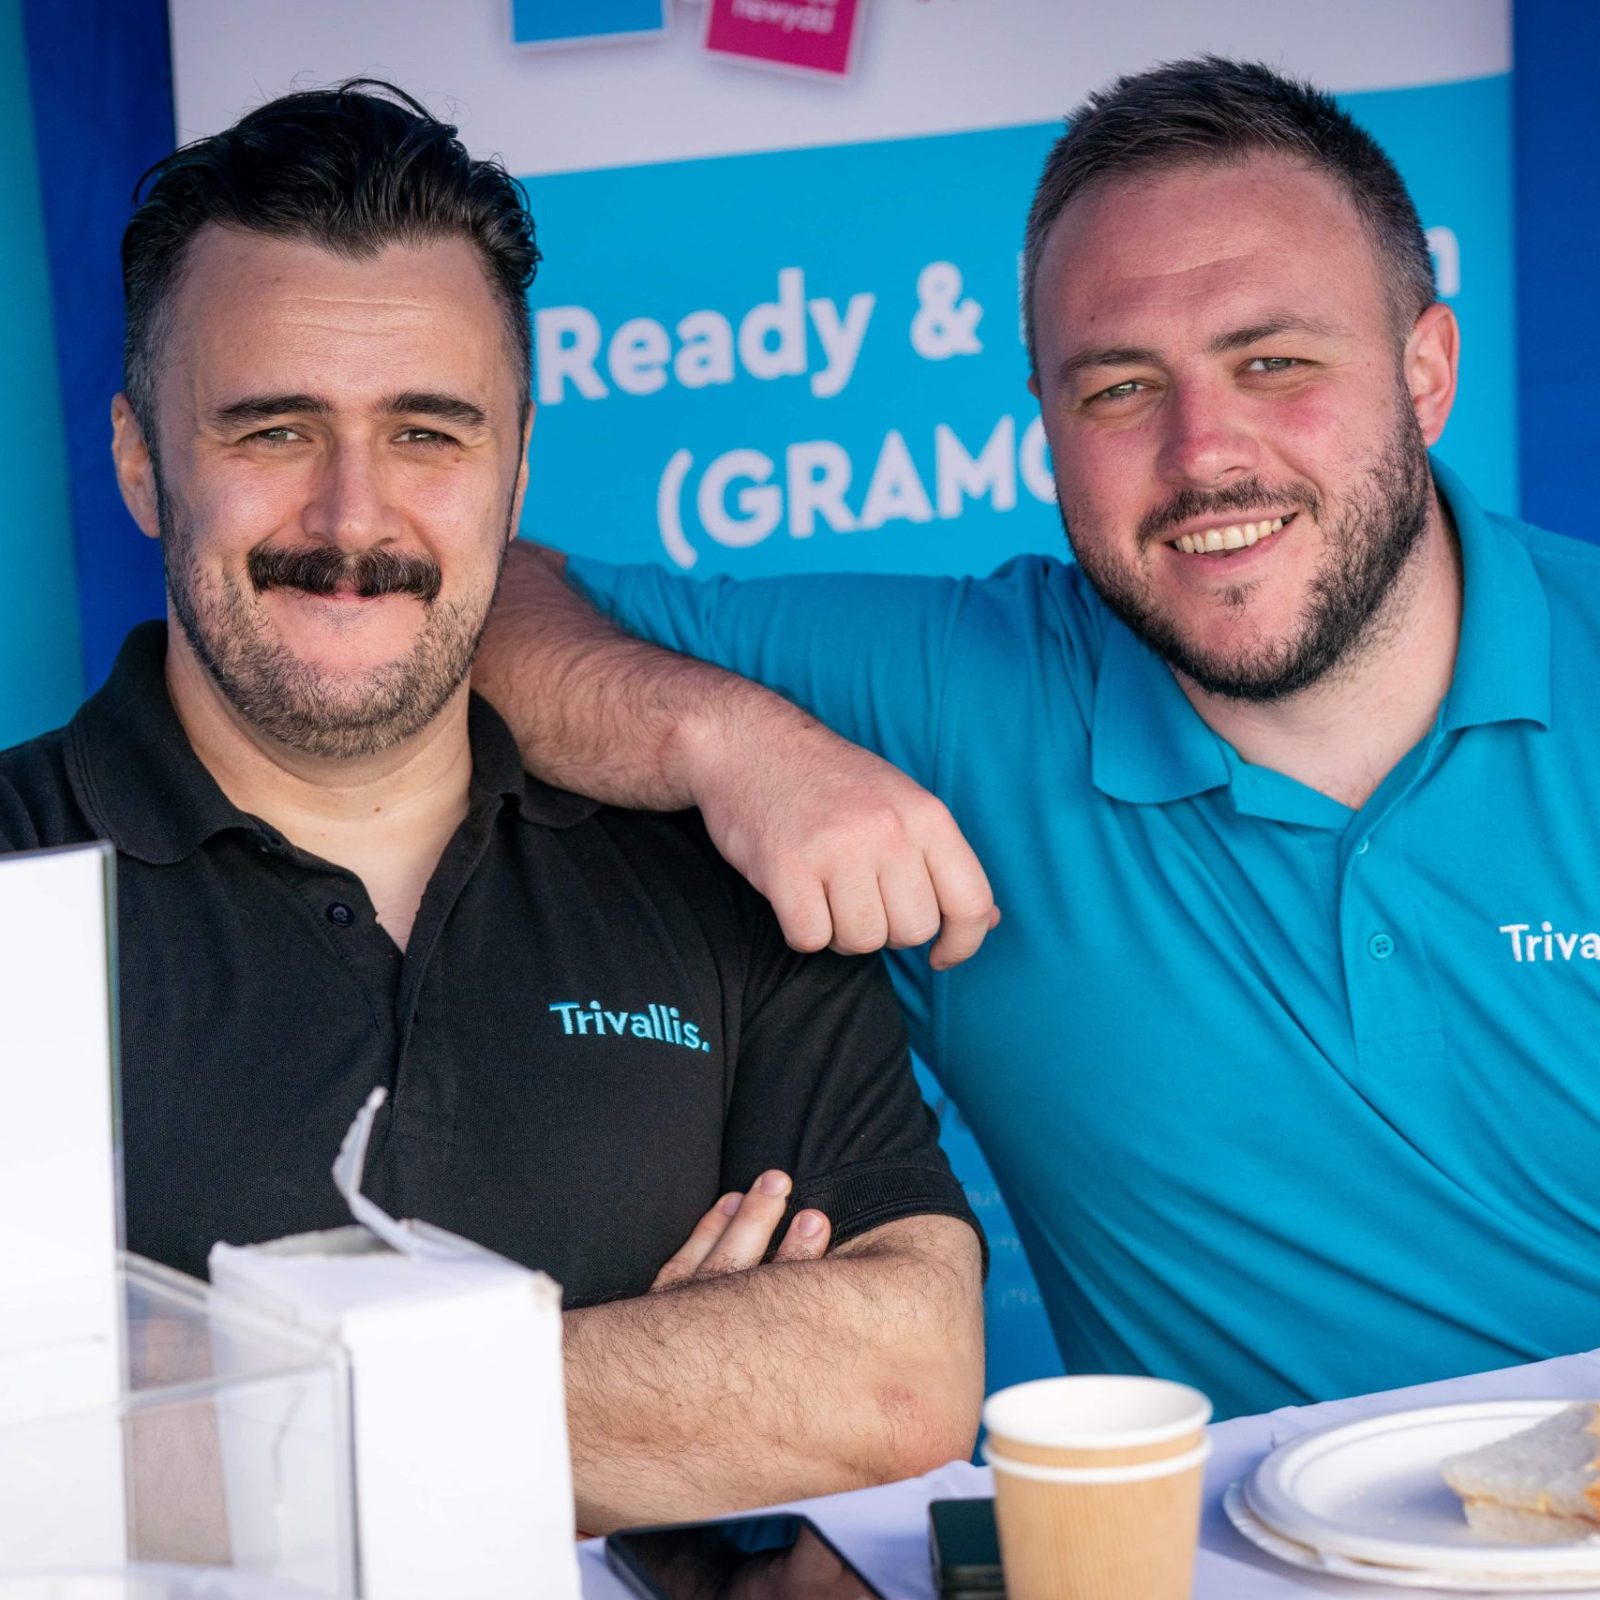 Trivallis Housing Landlord Wales Two men in blue polo shirts, bearing the logo 'Trivallis,' are smiling and posing together at a Trivallis housing promotional booth with a paper cup and a piece of cake on the table